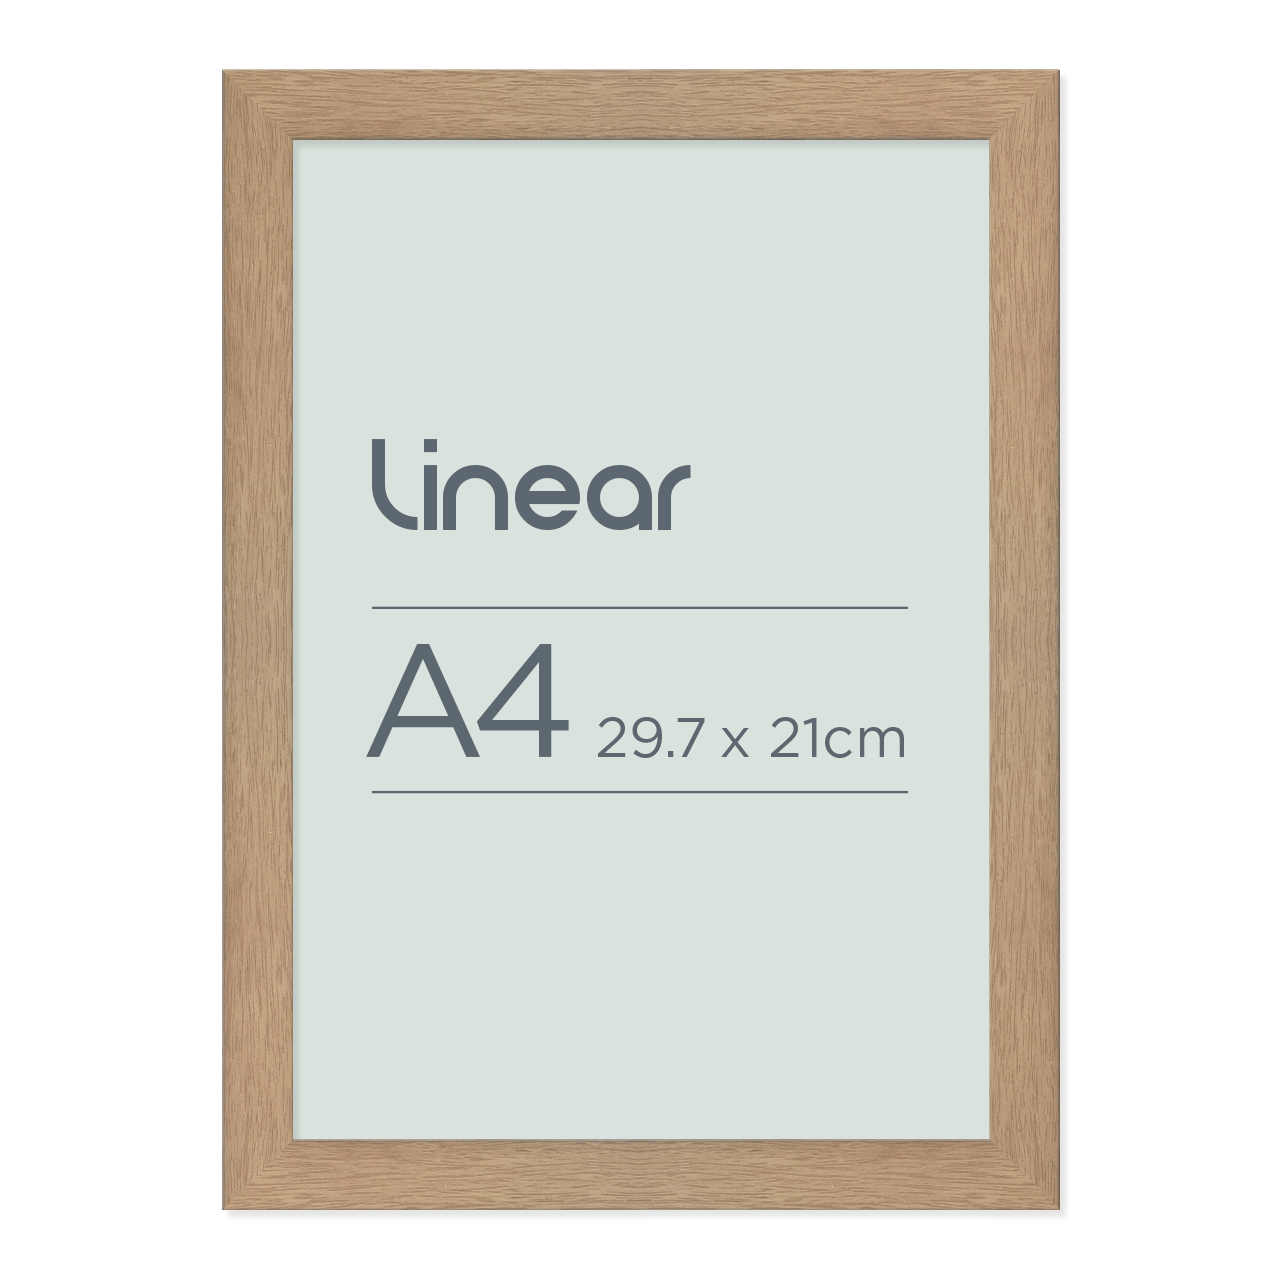 Linear Natural Oak Finish Picture Frame for A4 Artwork